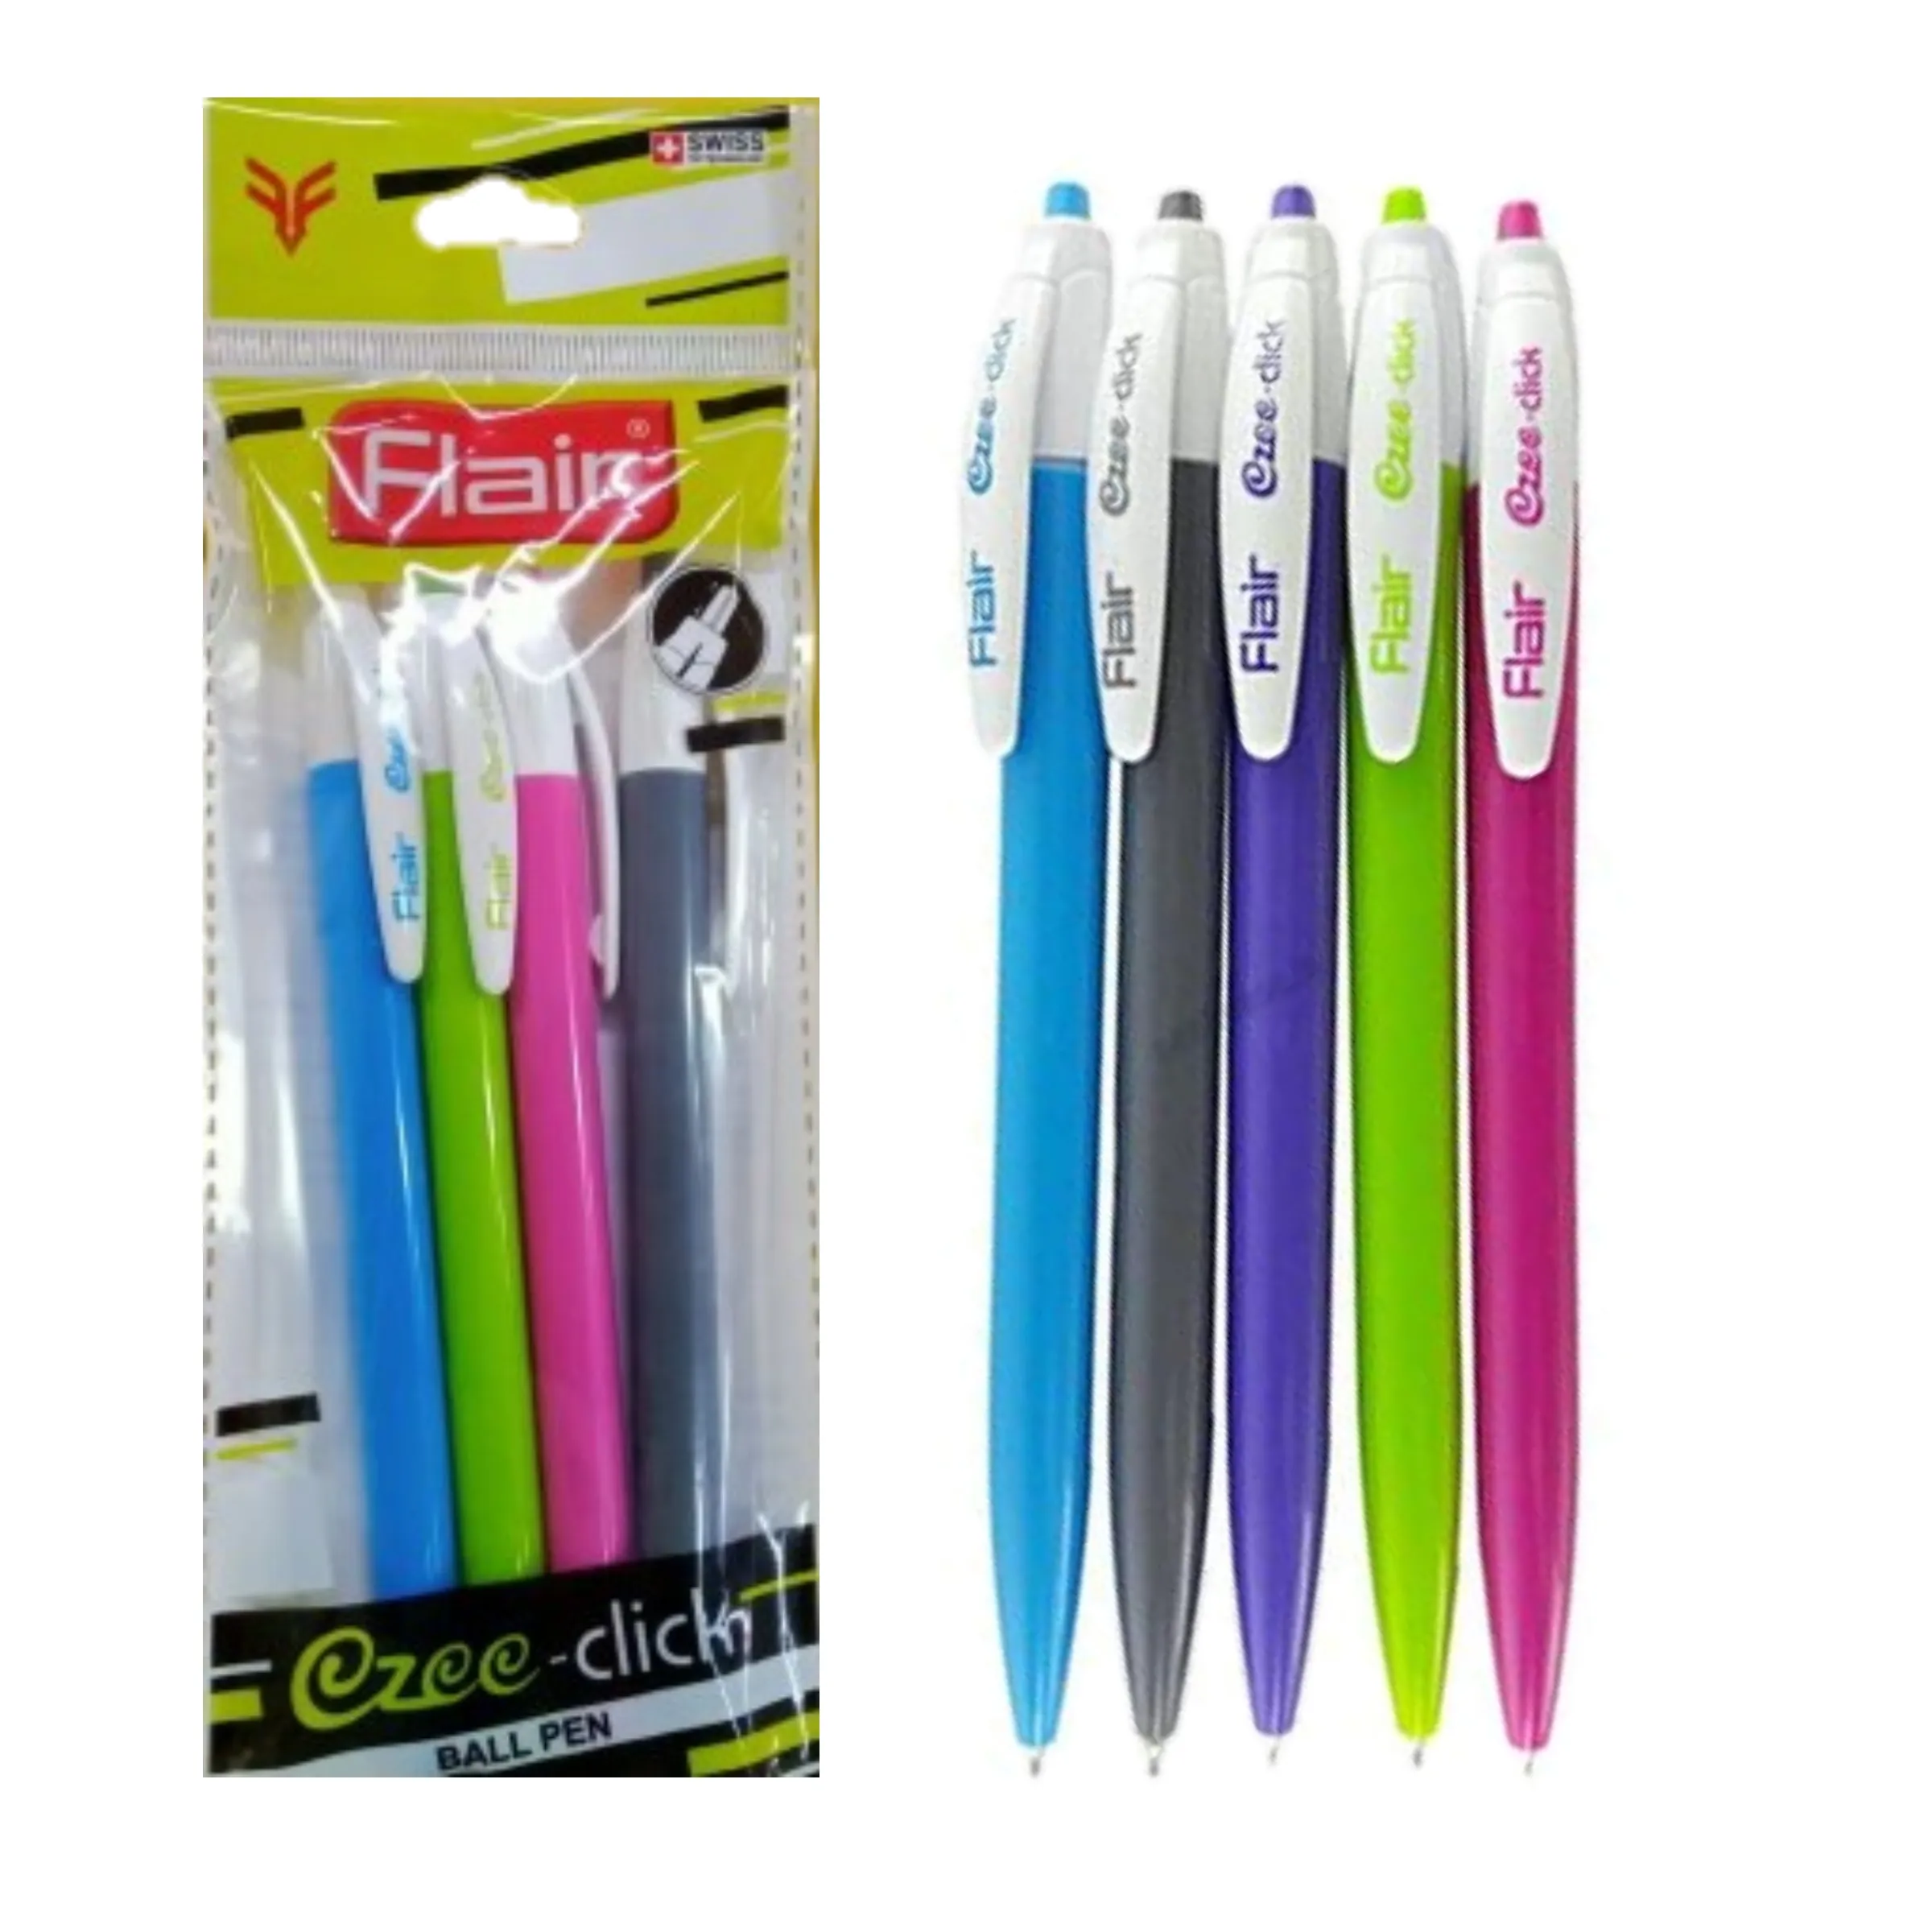 Flair Ezee Click Ball Point Pen Black Ink 1 Pack of 5 Pens